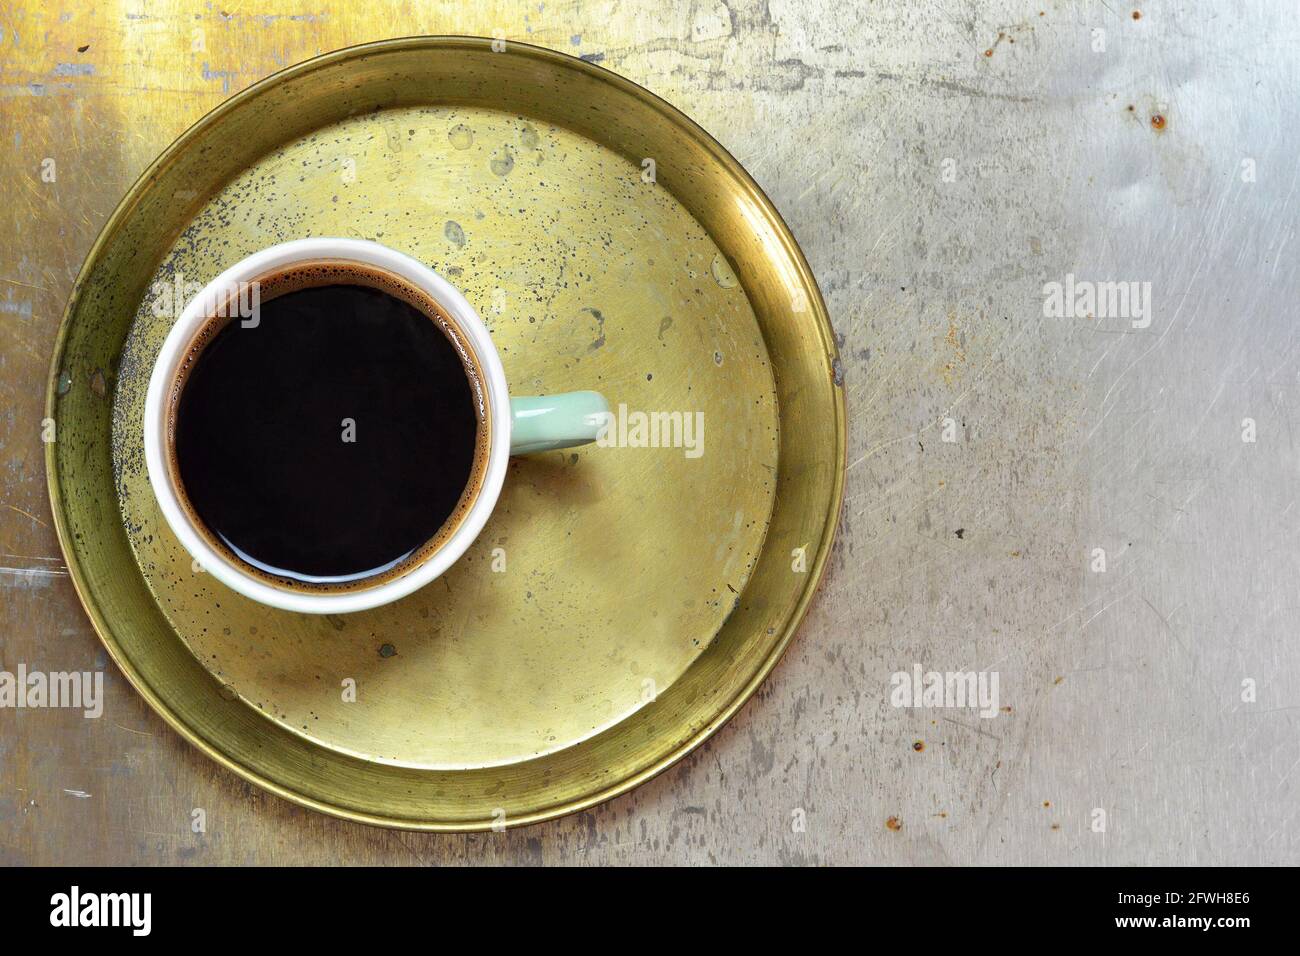 Cup of coffee on old tray Stock Photo